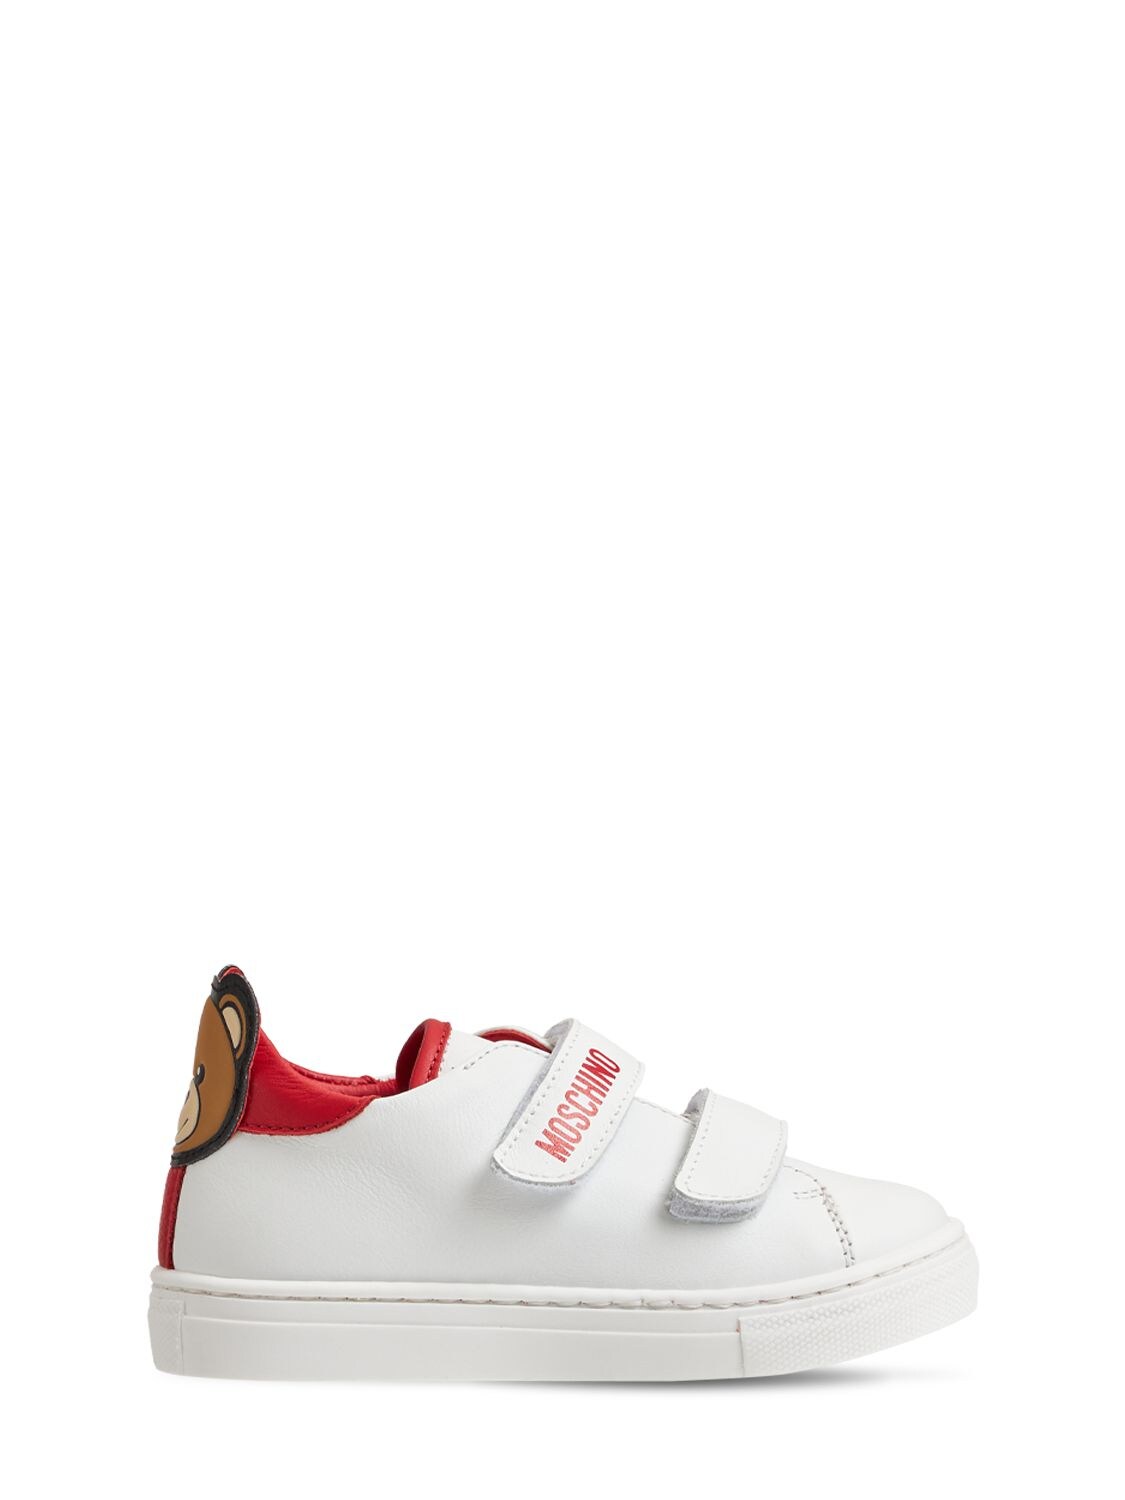 Moschino Kids' Leather Strap Sneakers W/ Patch In White,red